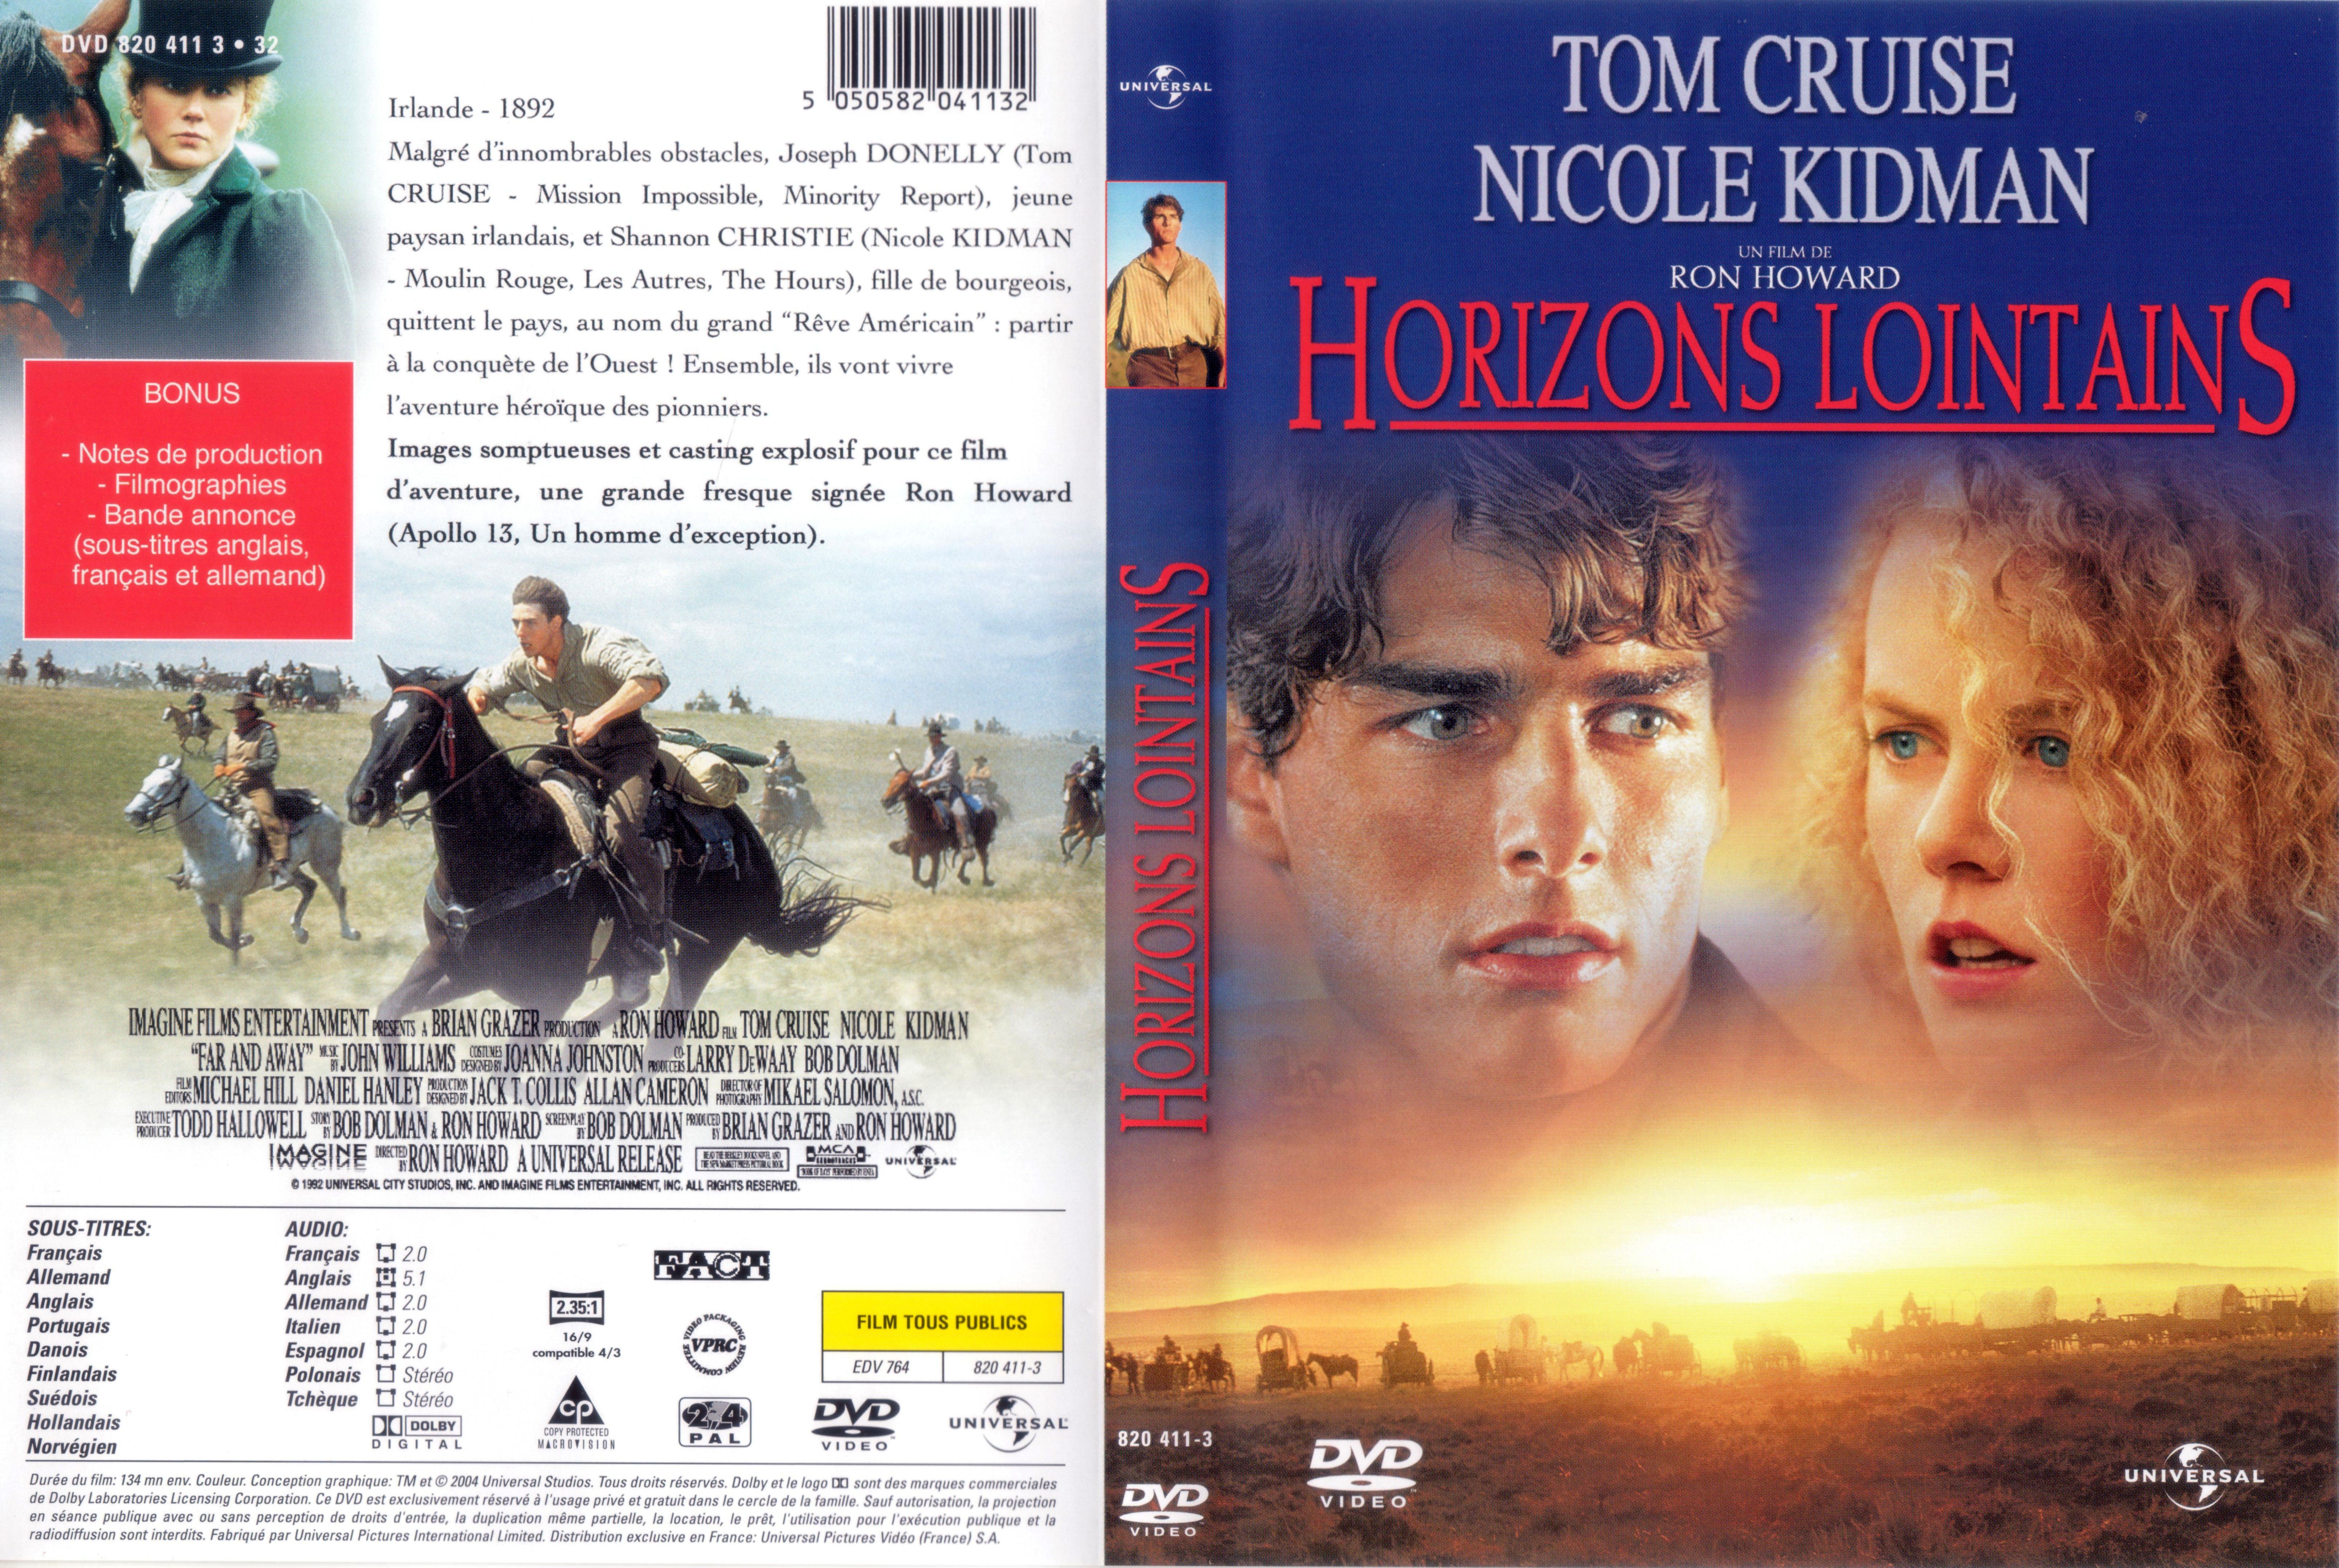 Jaquette DVD Horizons lointains v2